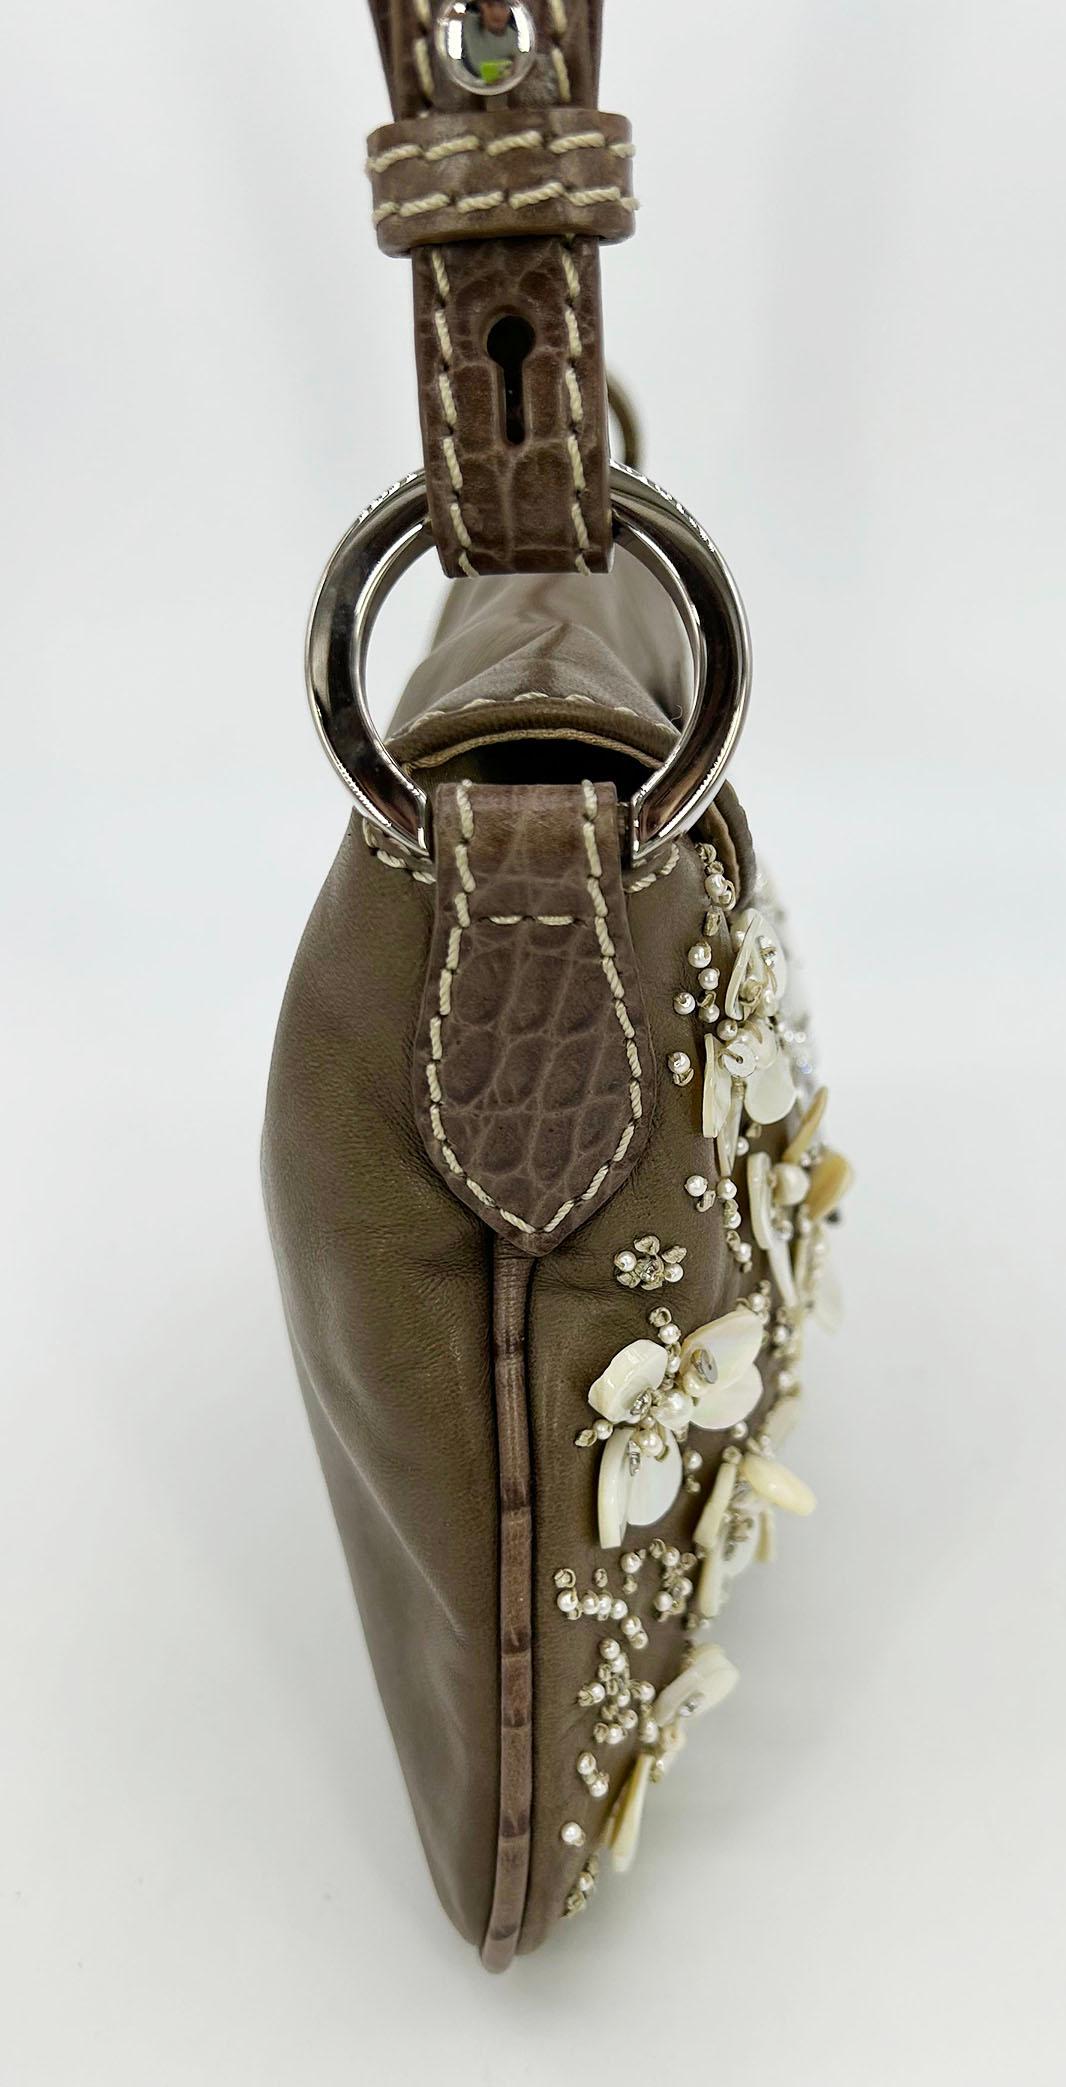 Valentino Pearl Beaded Leather Crystal Shoulder Baguette in good condition. Brown leather body trimmed with alligator leather piping and handle. Silver hardware. Front side features beautiful pearl beaded flowers.  Front magnetic flap strap closure